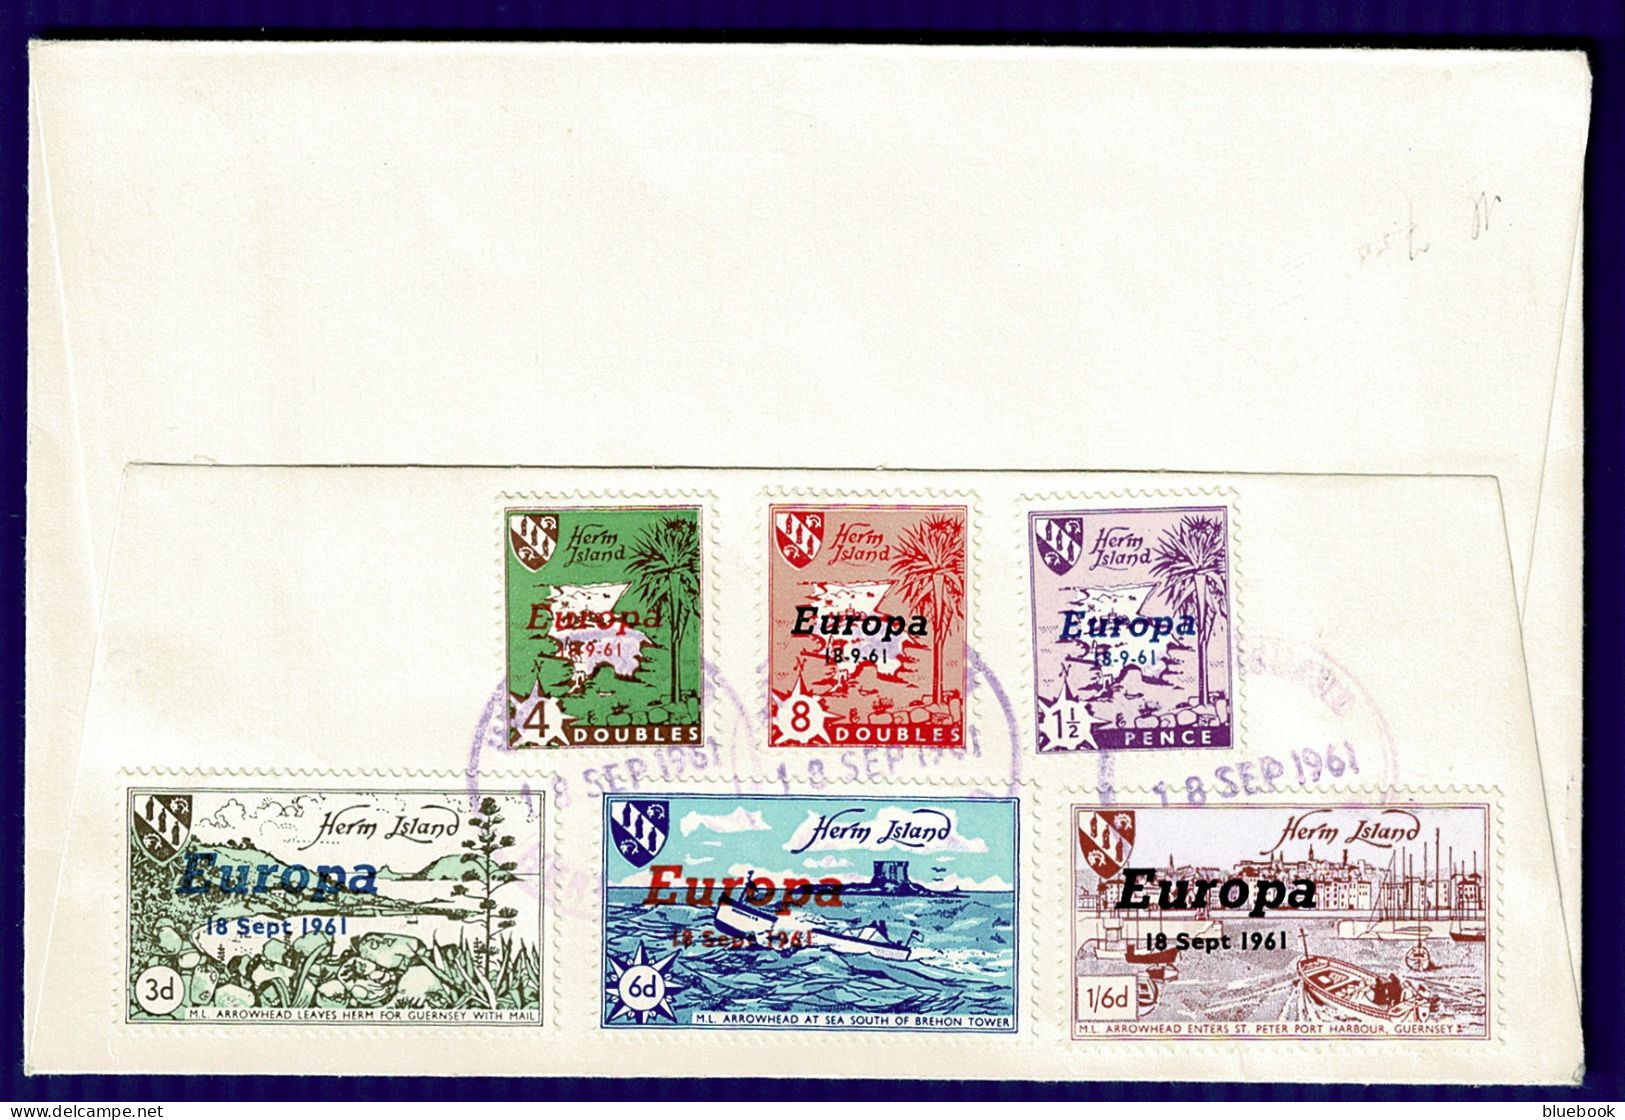 Ref 1649 - 1961 FDC Cover Herm Island To Guernsey - Europa Set Of Stamps On Reverse - Guernsey